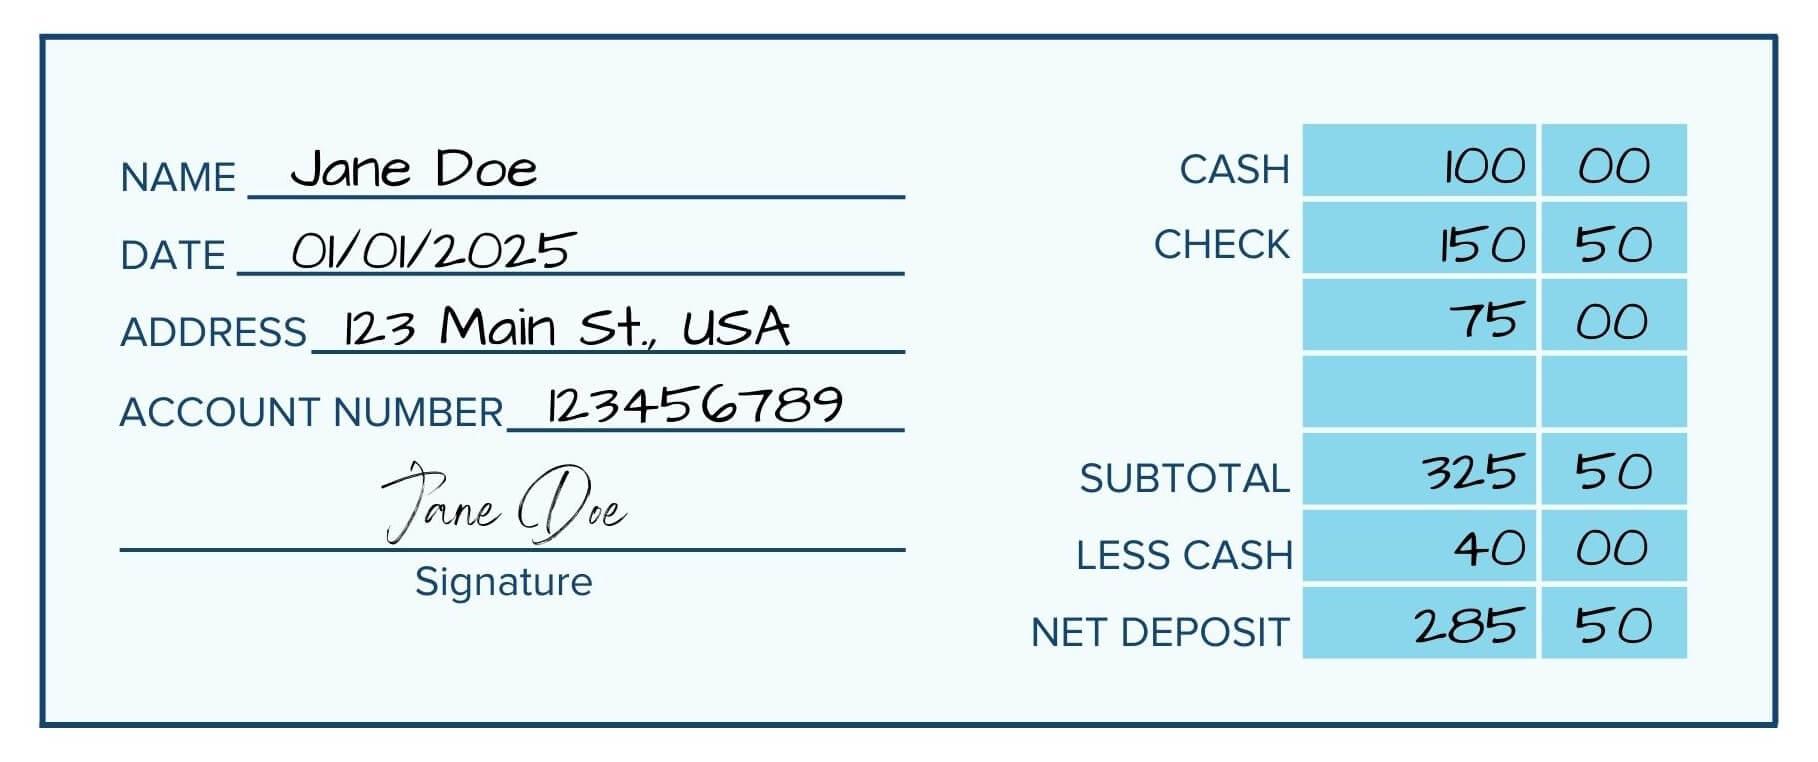 Sample deposit slip with information written in as an example